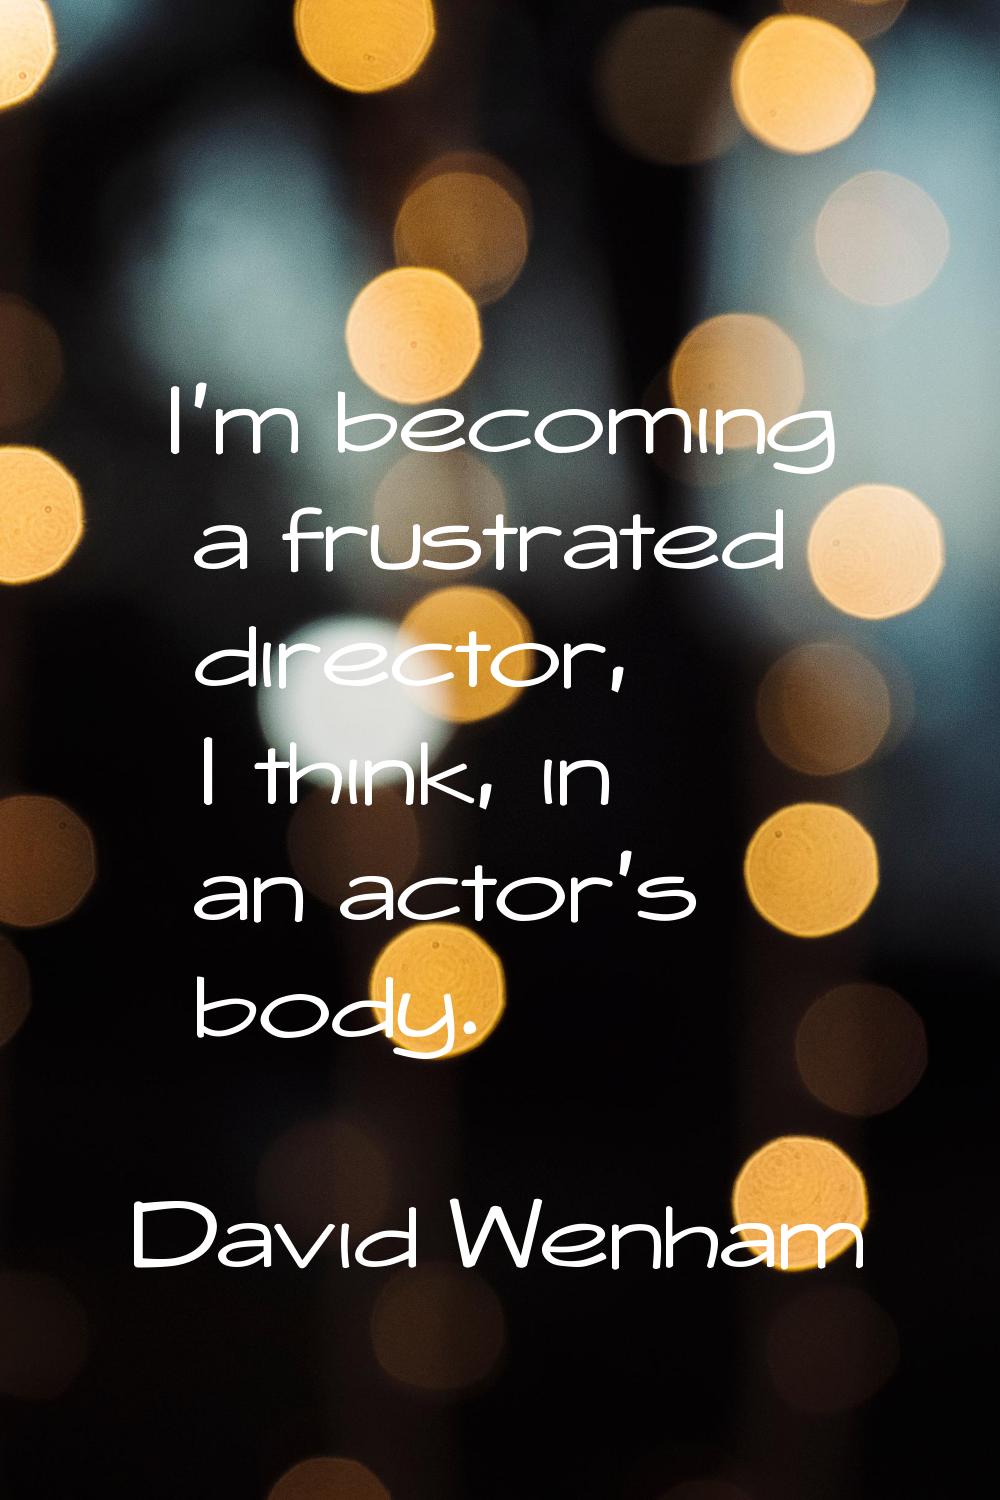 I'm becoming a frustrated director, I think, in an actor's body.